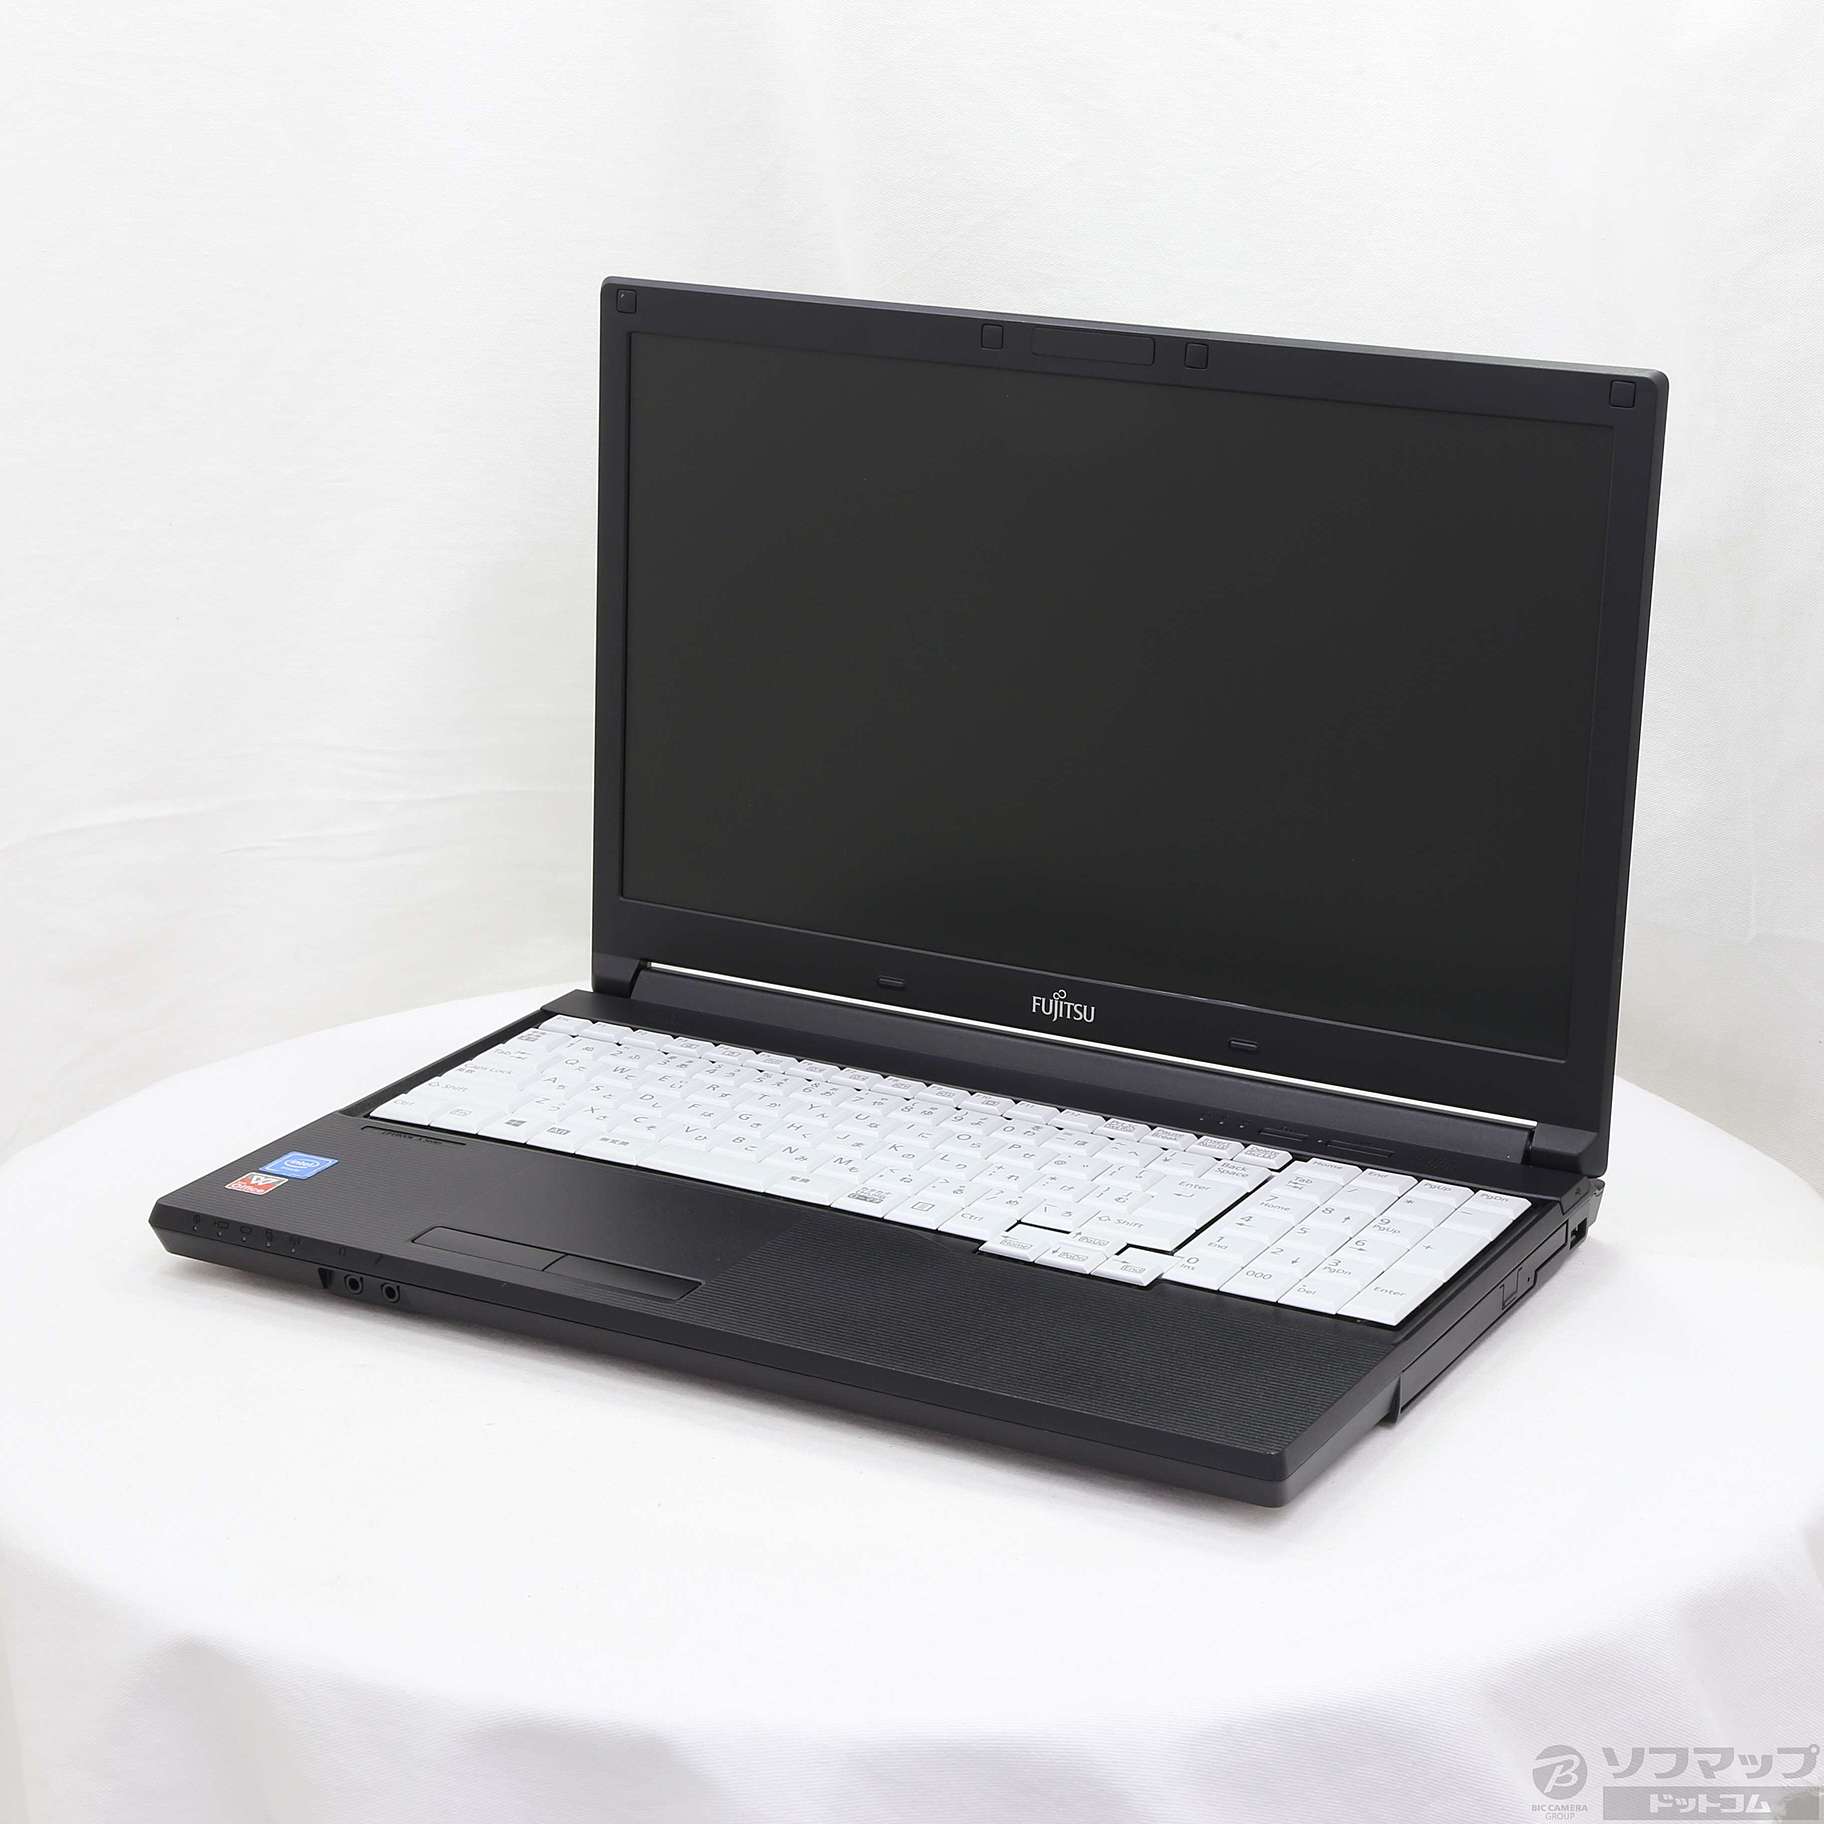 LIFEBOOK A576／PX FMVA1603FP